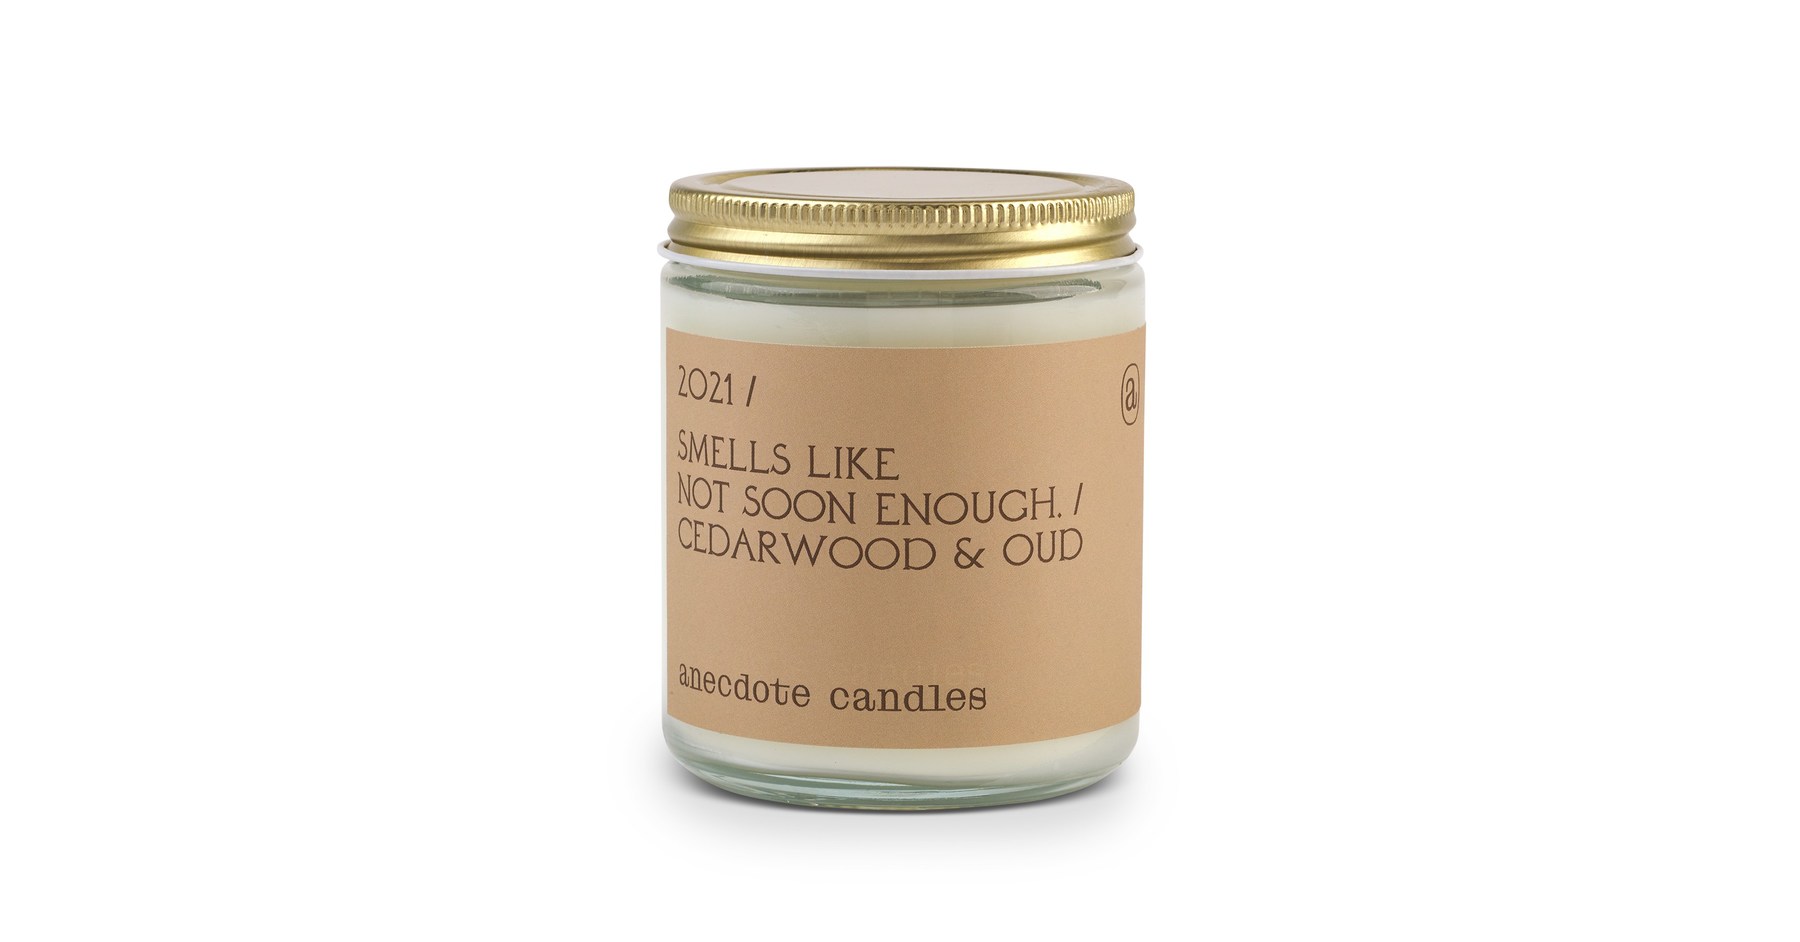 Anecdote Candles Launches Candle of the Year